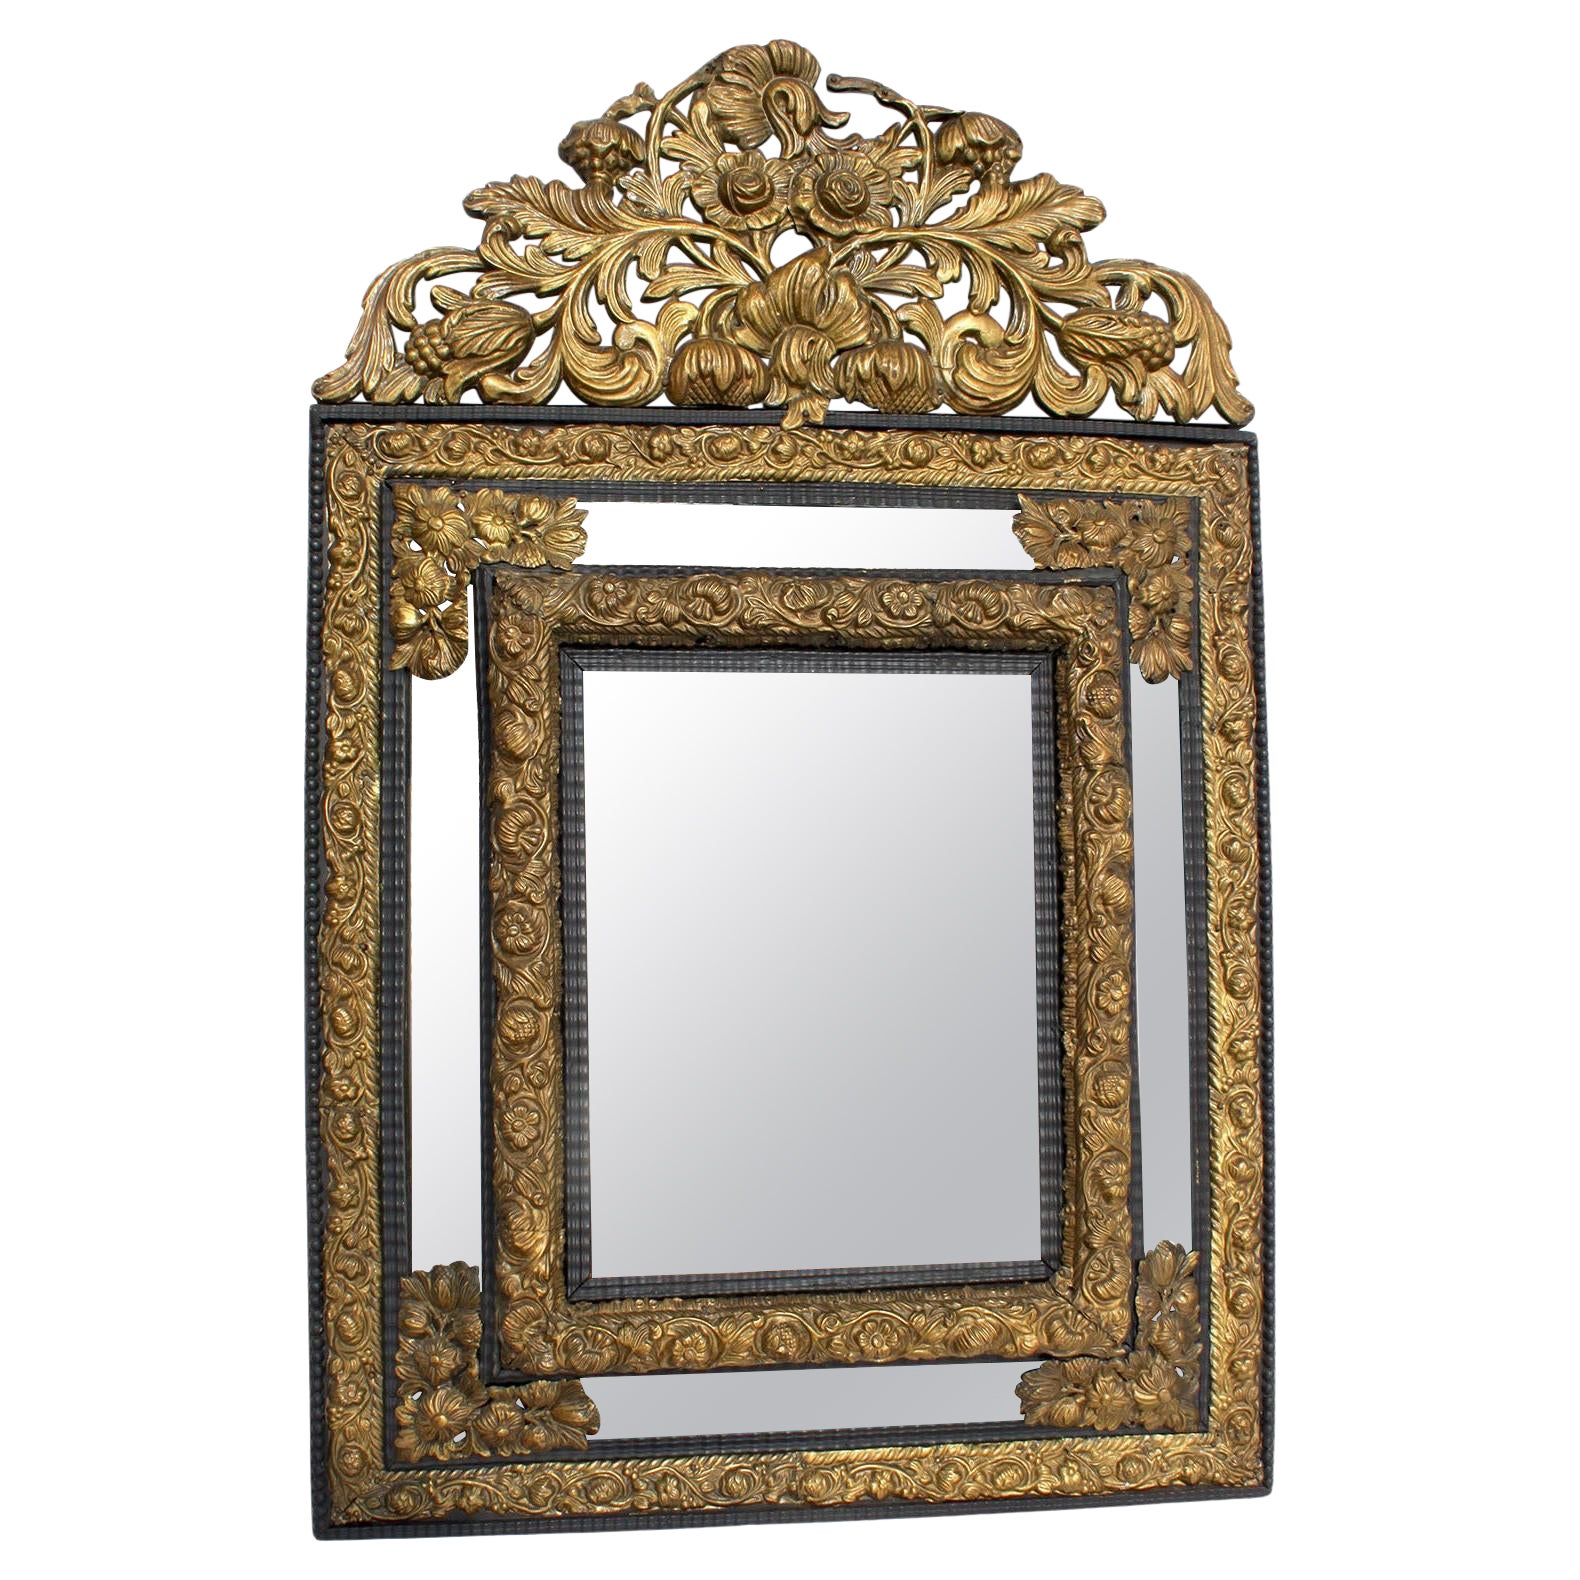 A French 19th Century Baroque Style Hammered Gilt-Brass Repoussé Mirror Frame